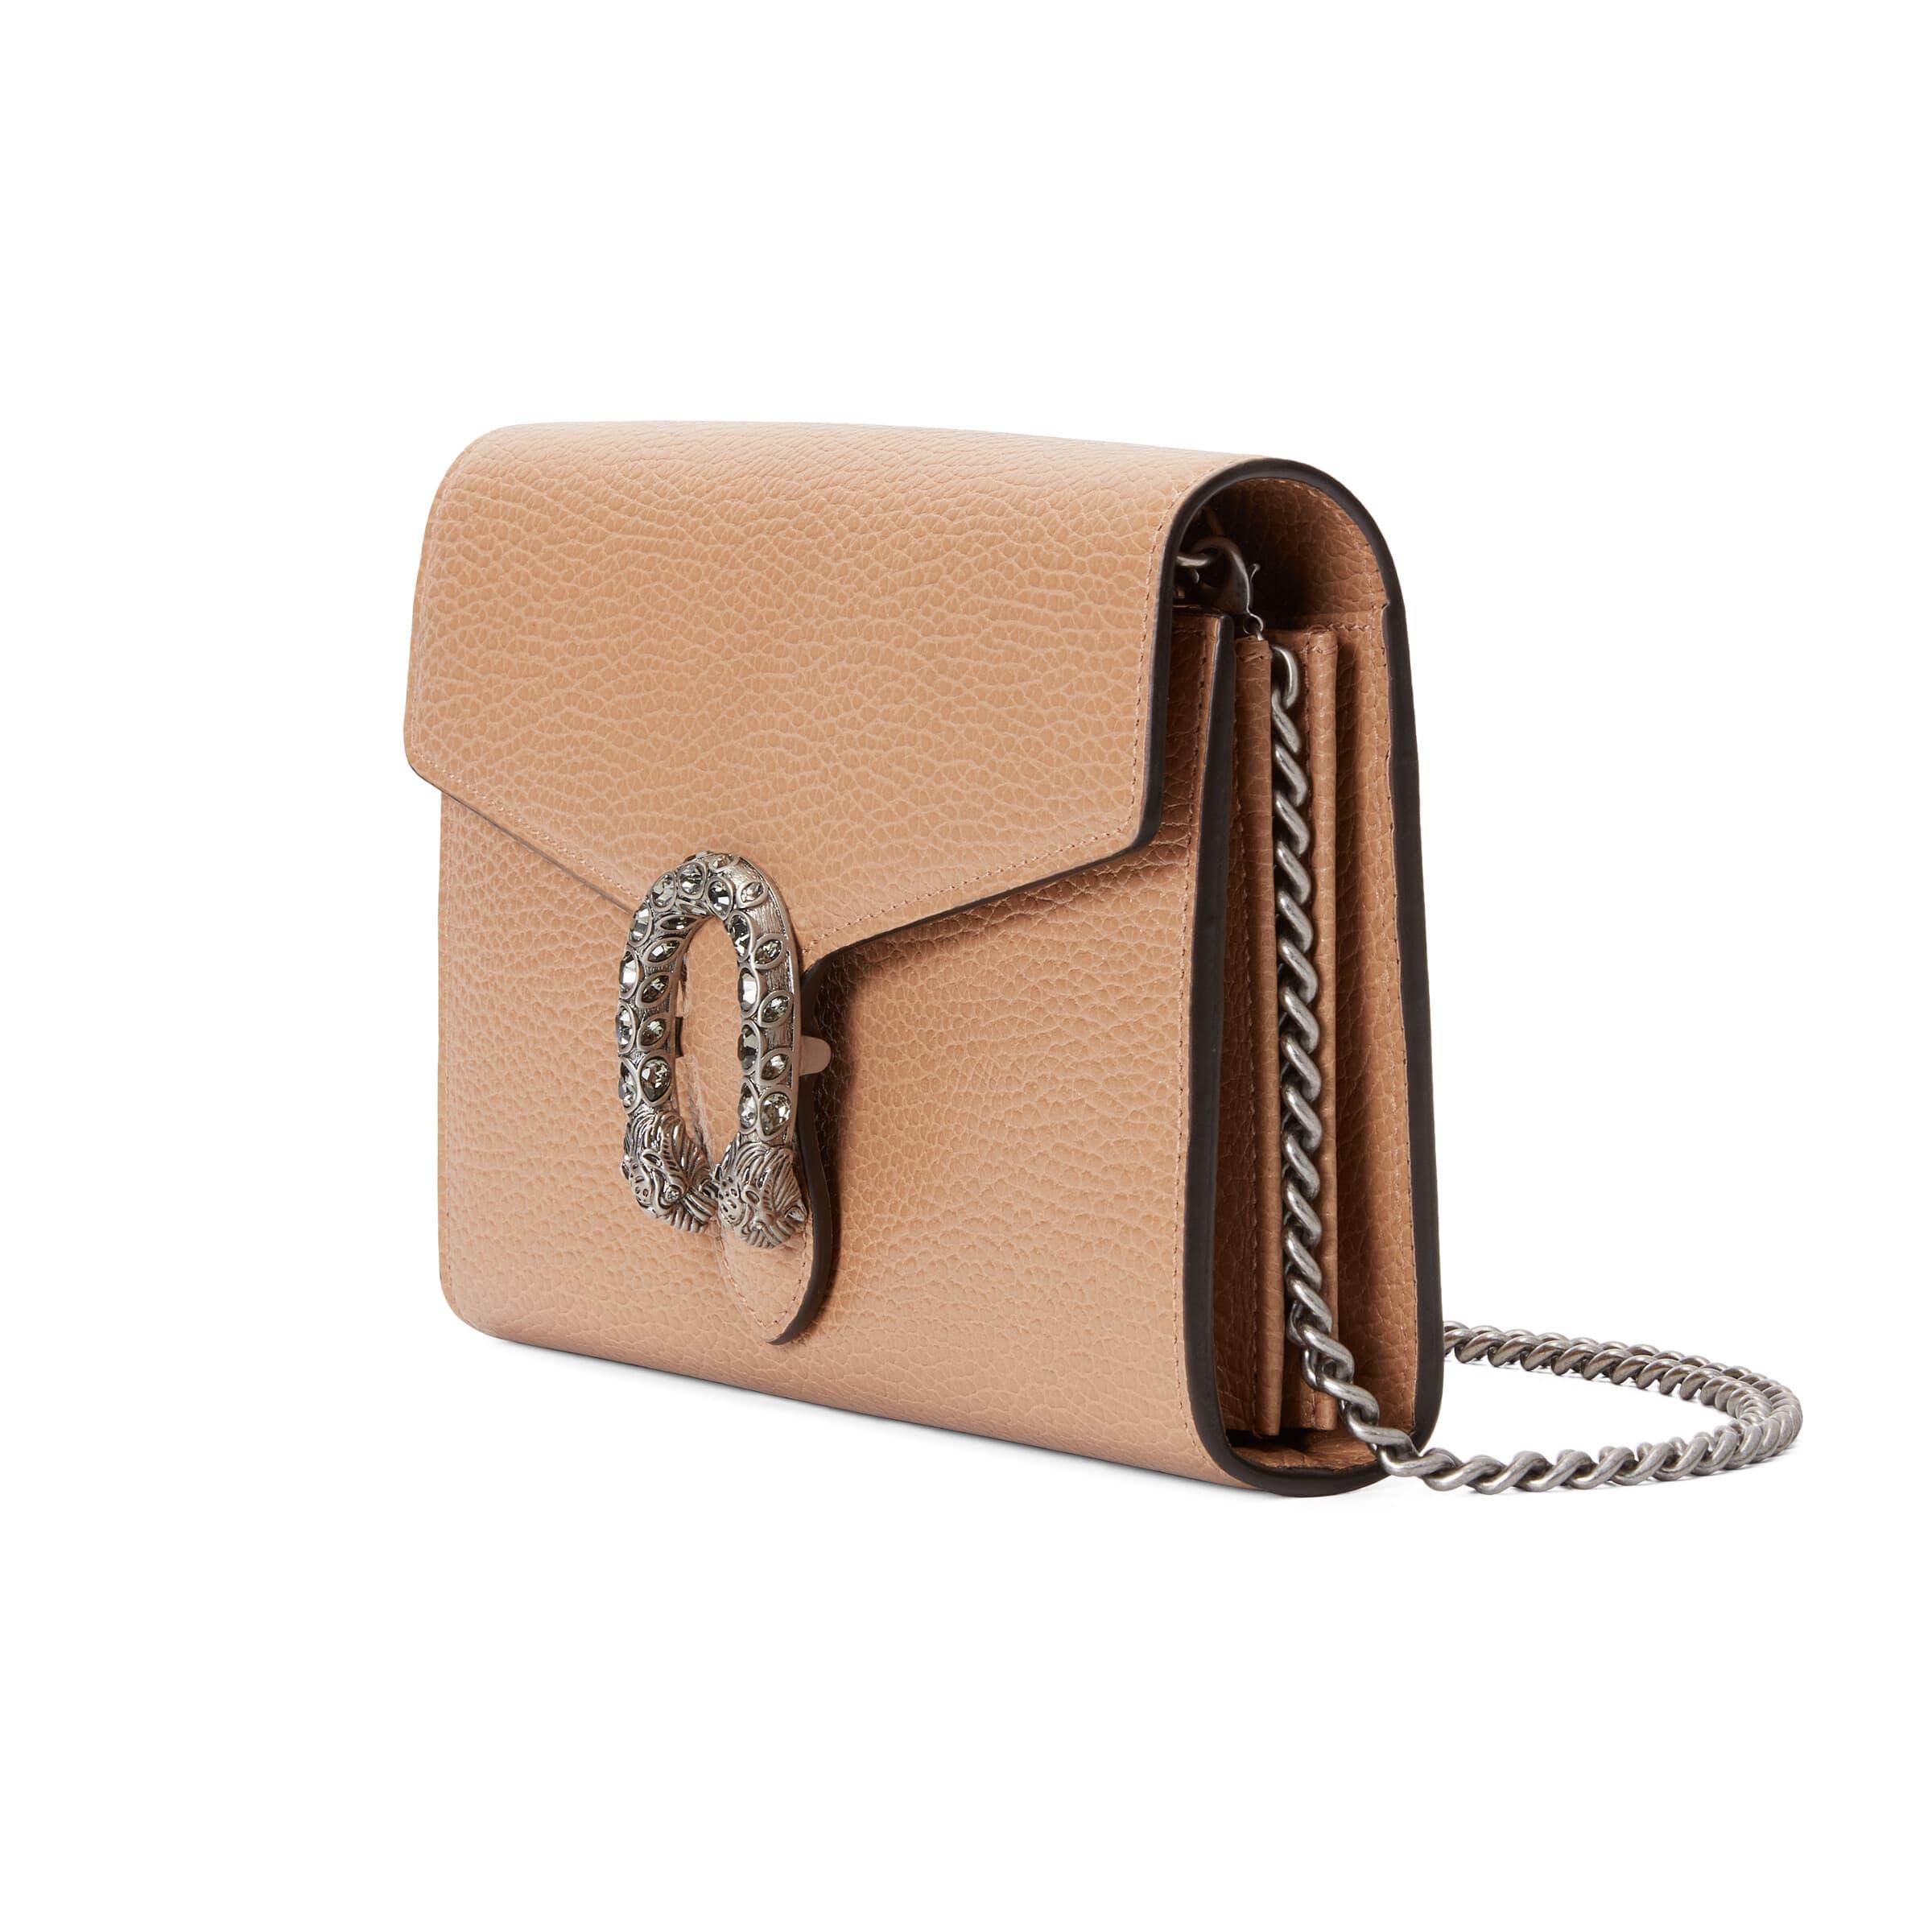 Gucci Dionysus Mini Leather Chain Wallet in Natural | Lyst